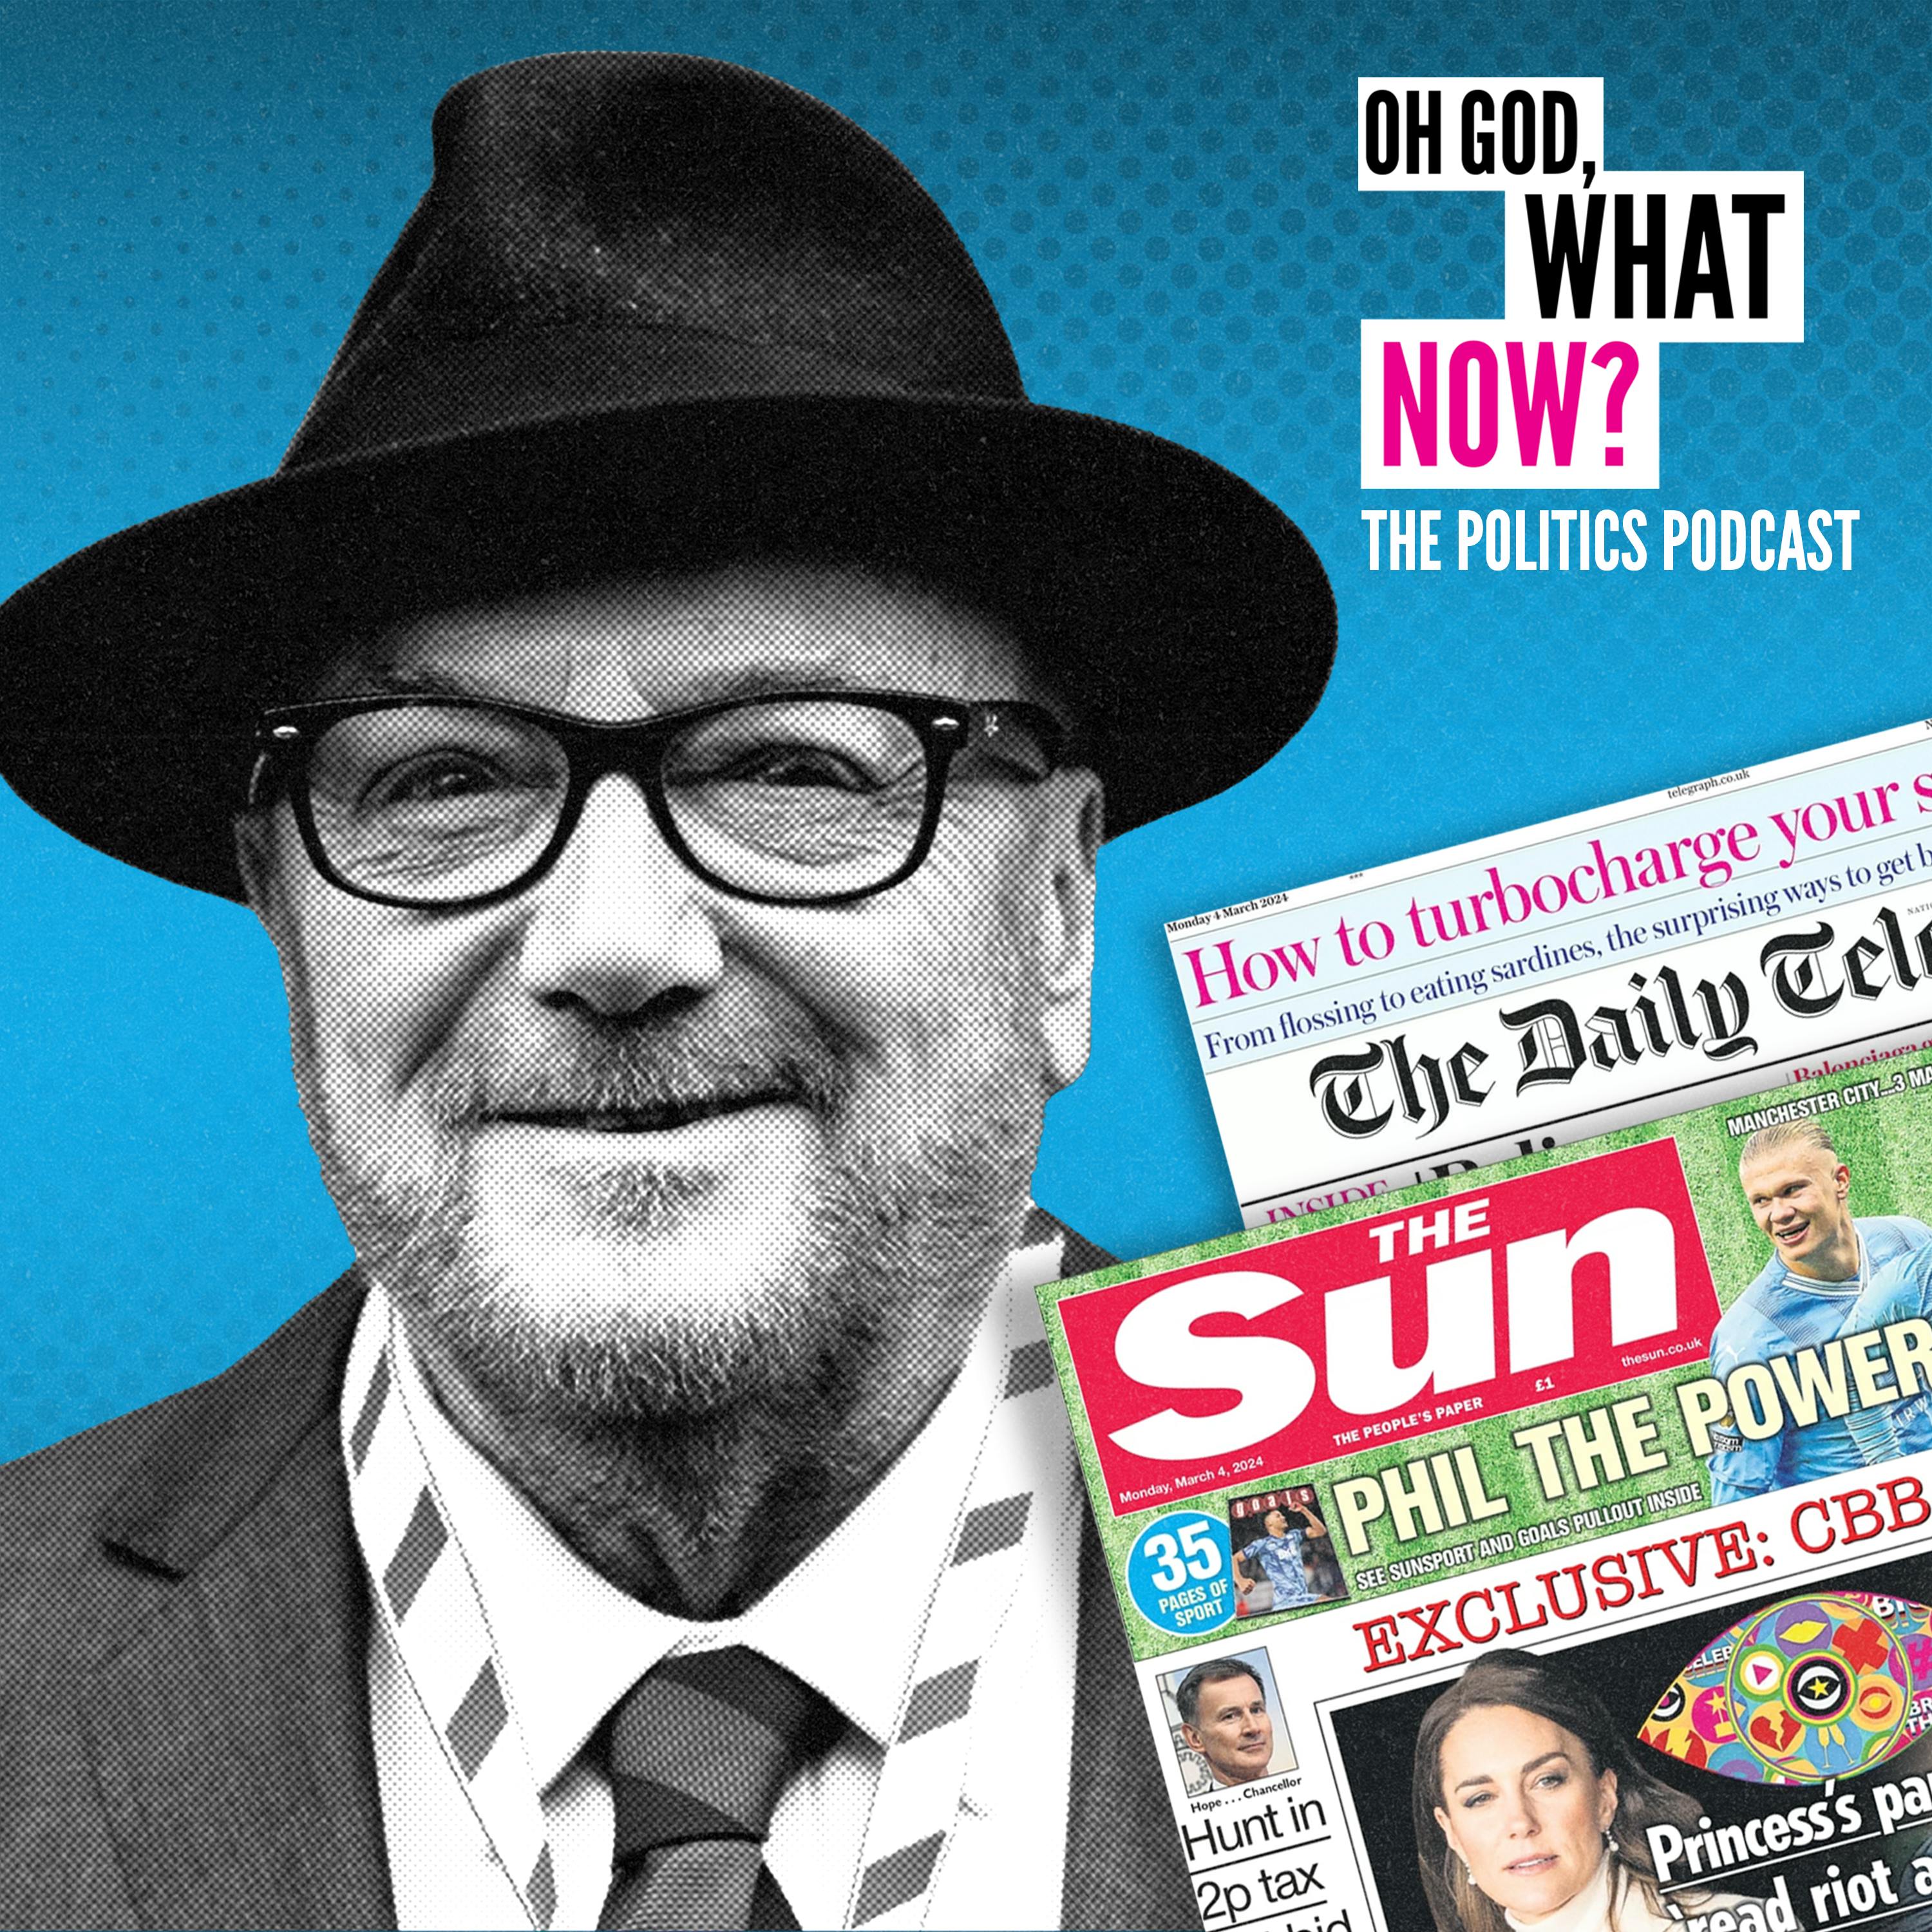 Is Galloway the game-changer he thinks he is?